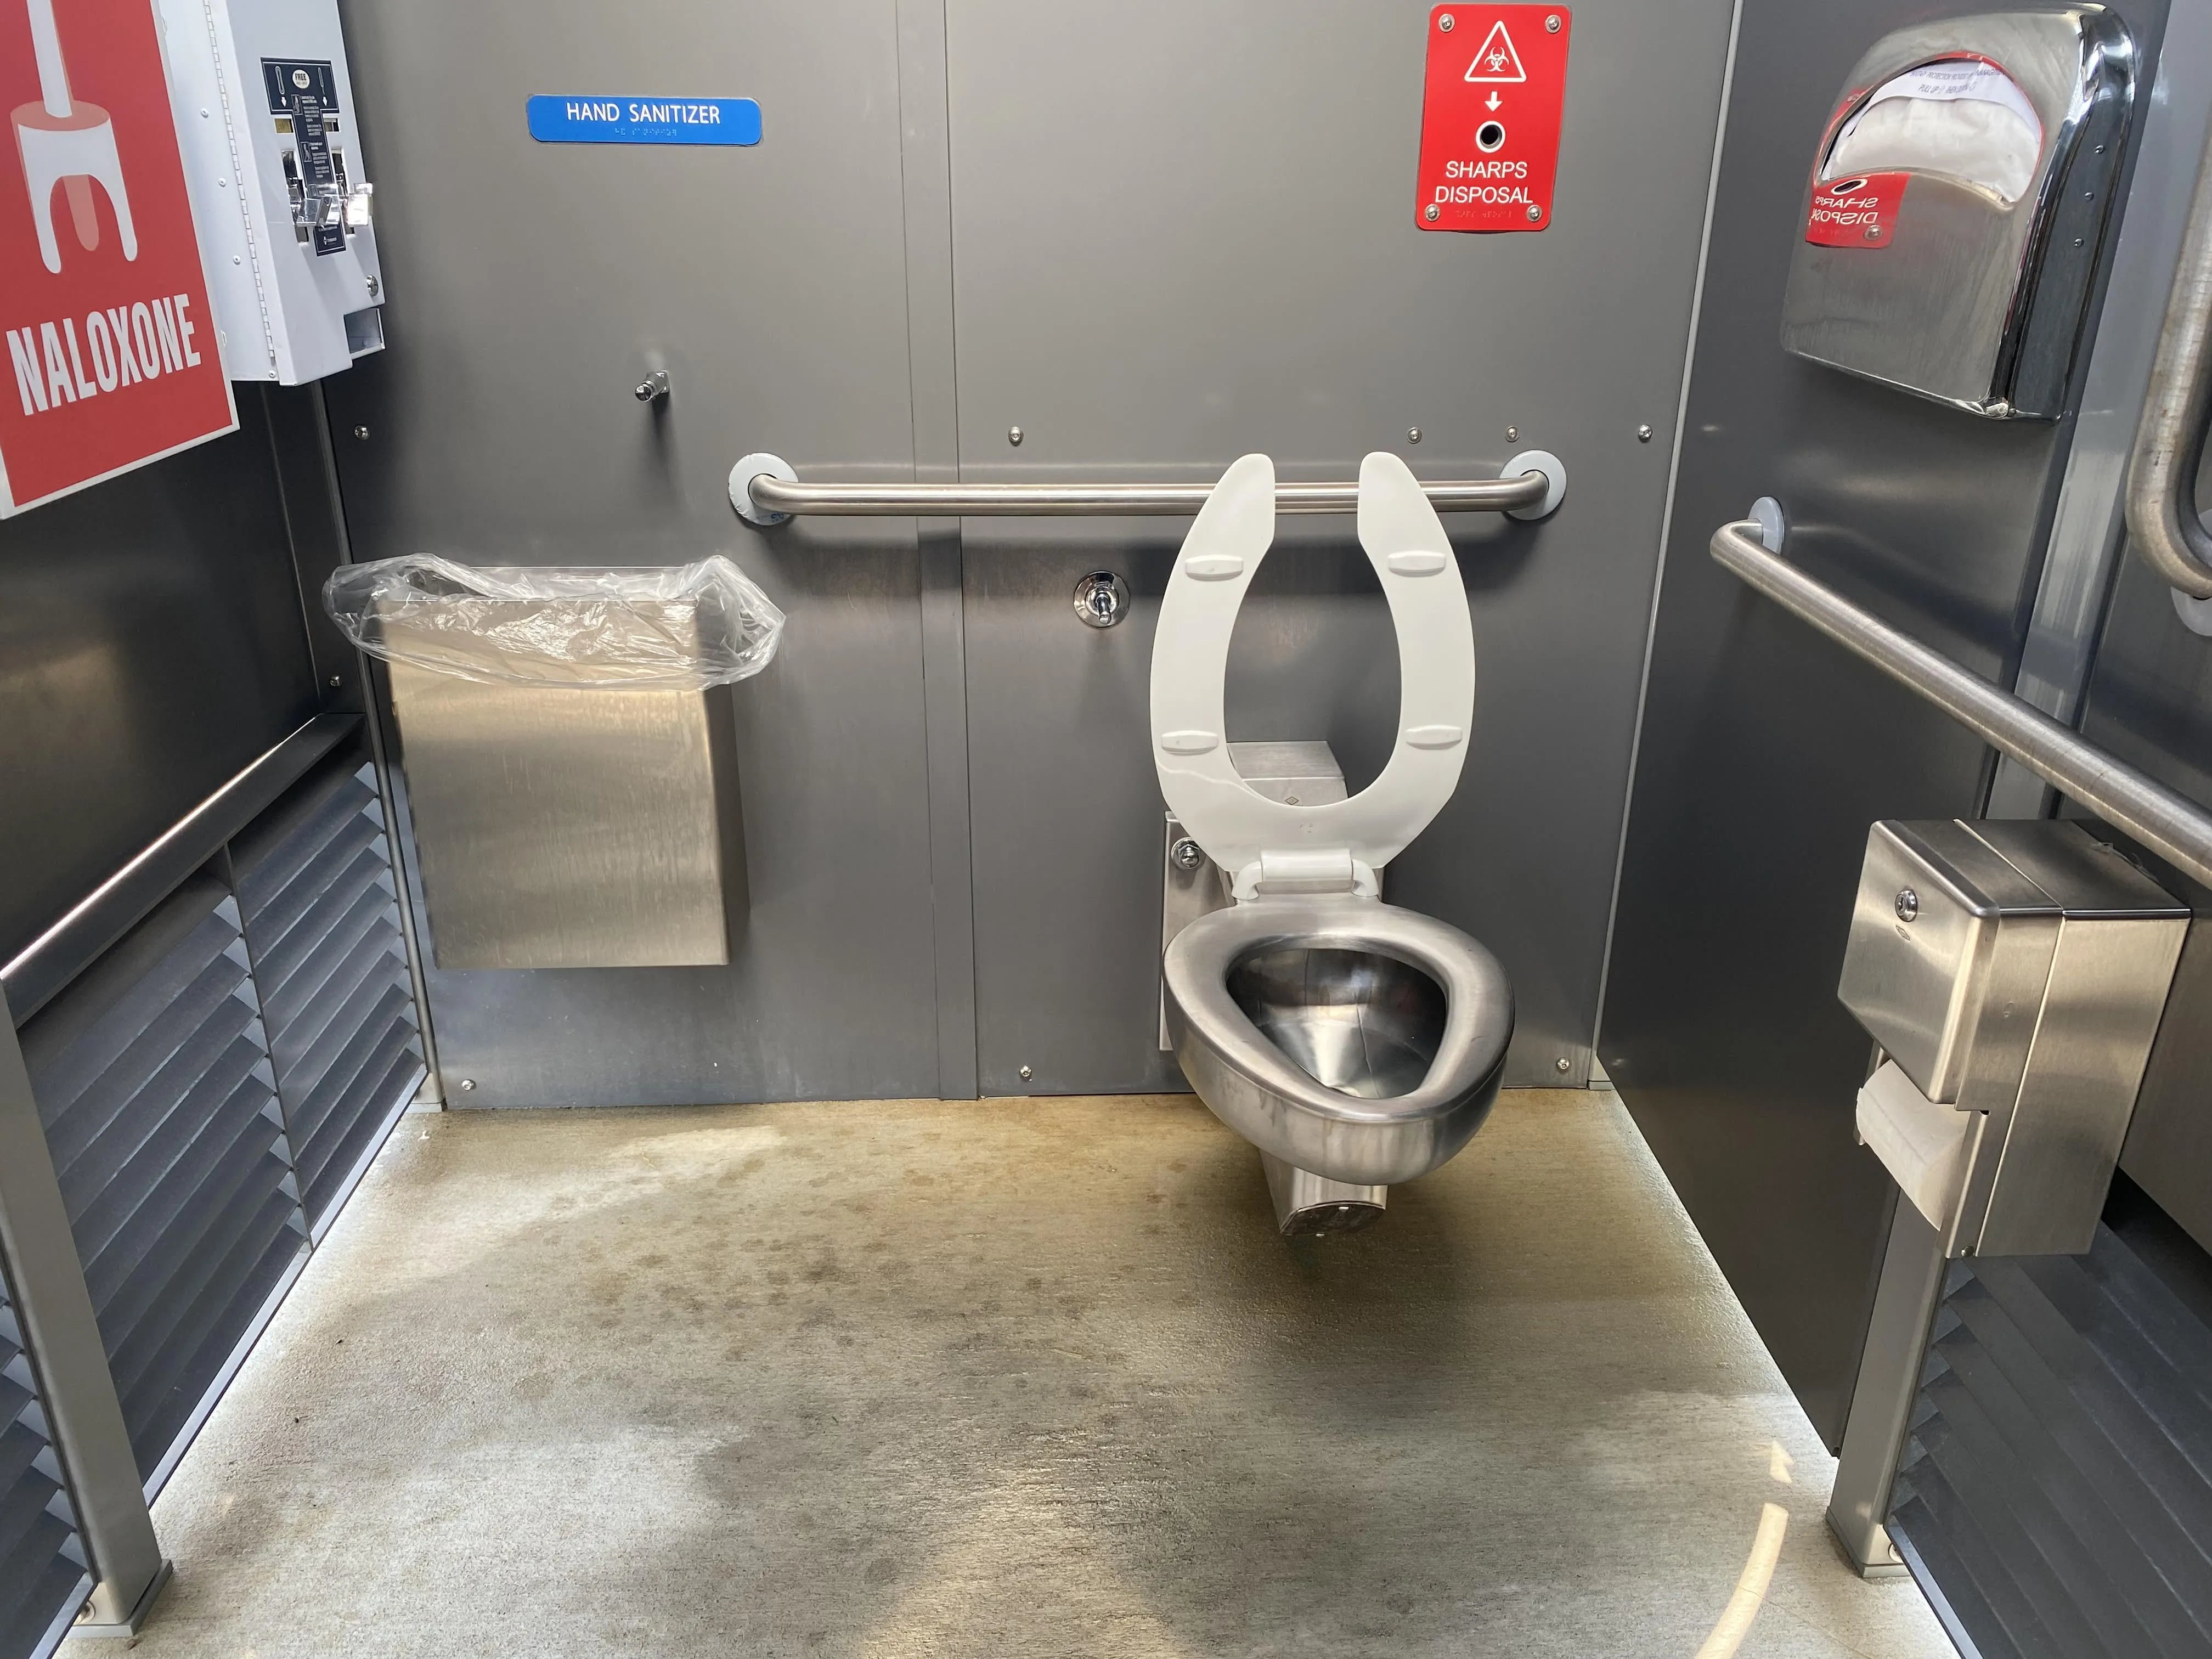 Harvard Square's First Public Toilet Opening Was an Interesting Day